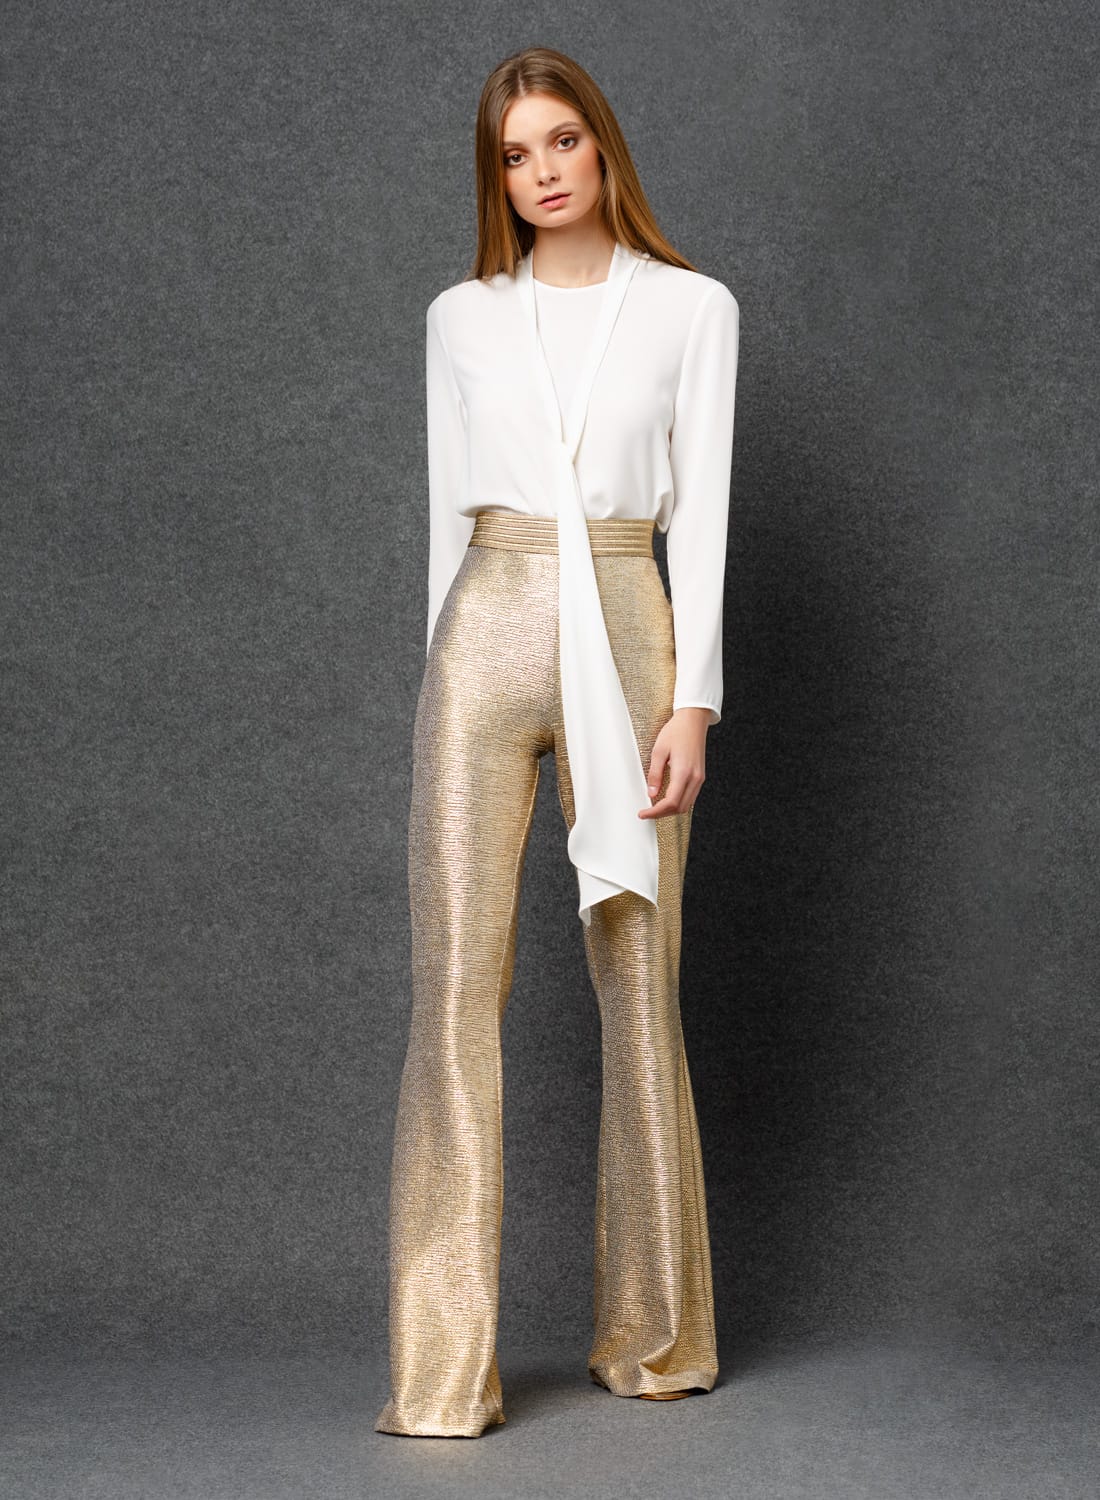 Party trousers for lady 2020